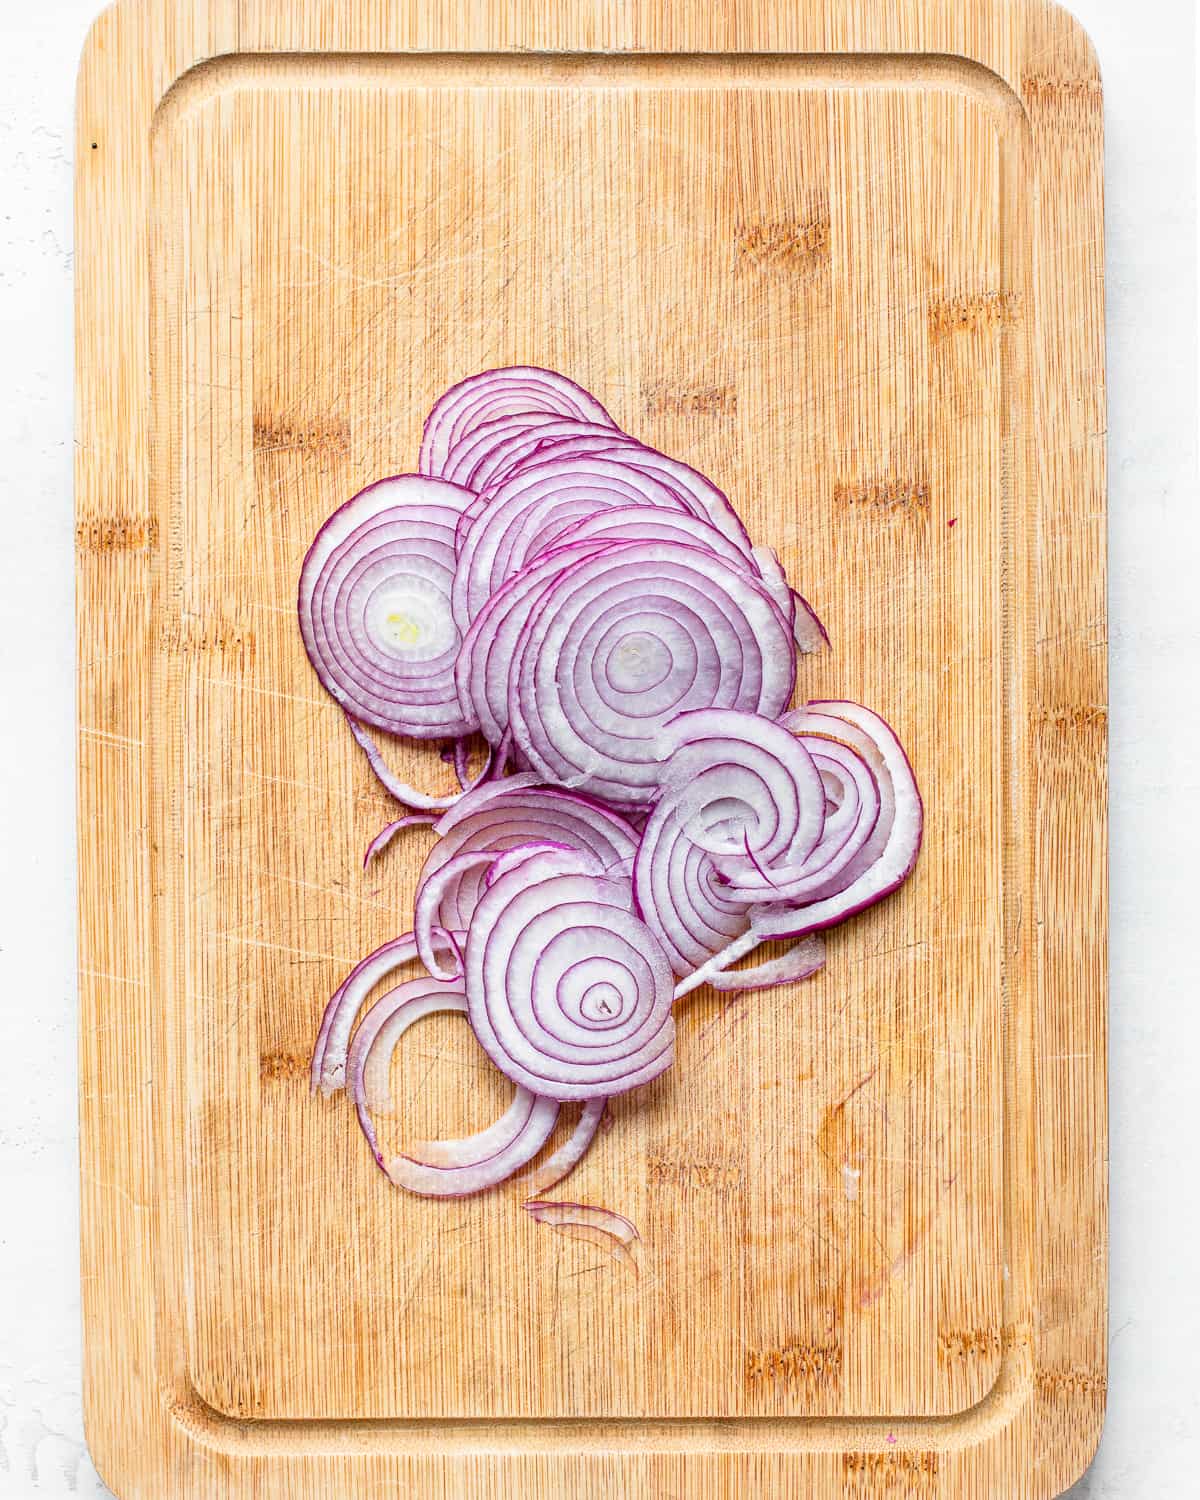 Sliced red onions on a wooden cutting board.